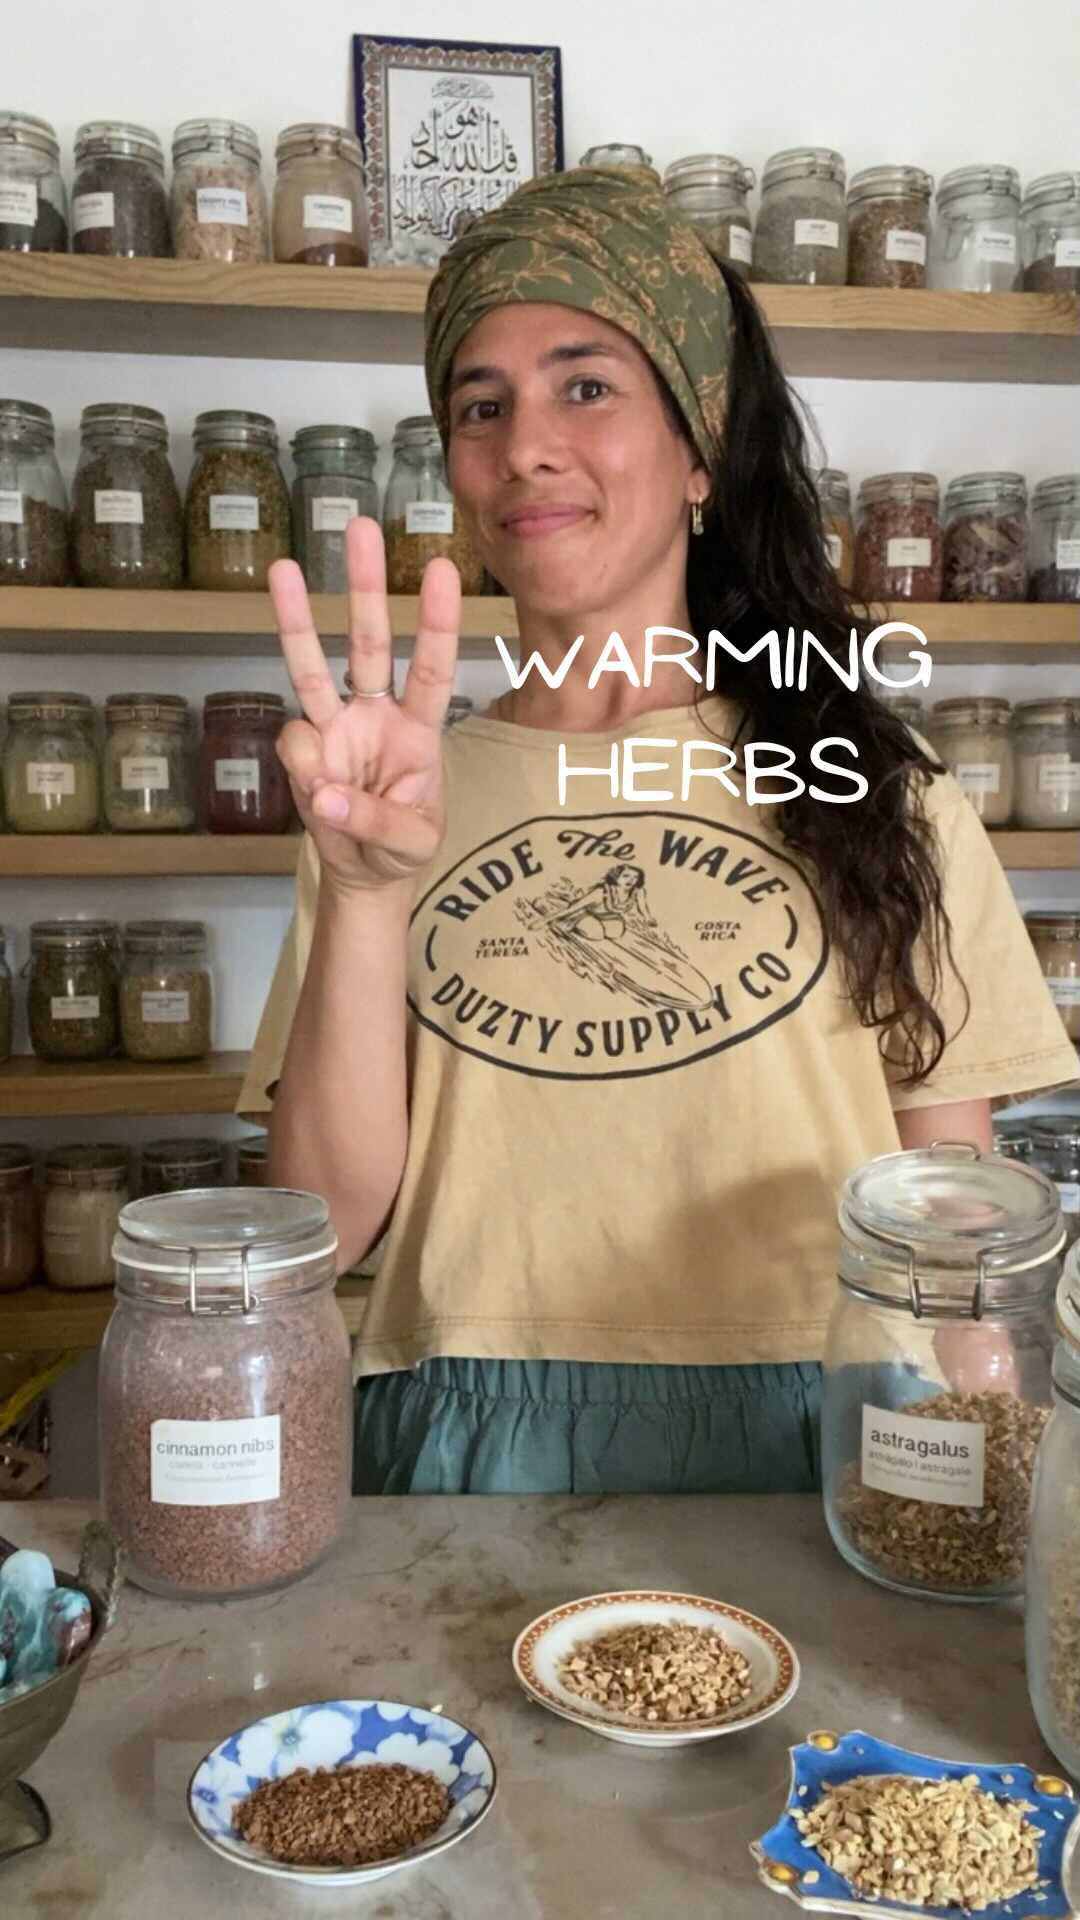 Feeling cold lately? 🥶

Medicinal herbs can warm you up! 🔥

Save this post and share it with a friend!

Certain herbs are considered to have a fire energetic, this means they can make you feel hot by activating your blood circulation. 

Fire herbs are beneficial to you if you are always feeling cold, have poor circulation, have cold extremities, have weak digestion and/or would like to increase libido and fertility.

On the other hand, people who already have a tendency to feel too hot, menopausal women, impatient, fiery people have to watch aggravating that fire with extra fire herbs. 

Here are my 3 favourite herbs to warm me up, get the the blood pumping and flowing and even break a sweat. 

🔥 GINGER: a spicy rhizome that is easy to add to food. It sends blood from the heart to the lower body: digestive system, reproductive system and knees. Drink 1-2 cups of a 20 minutes low simmer infusion. 

🔥ASTRAGALUS: an adaptogenic root that warms your bones, while being an excellent immune-stimulant. Simmer the root for 20 minutes. Drink 1-2 cups per day during 3 weeks. 

🔥CINNAMON: a naturally sweet bark that activates circulation and sends blood to the extremities and the womb. Add the powder to your hot chocolate, oatmeal, lattés or herbal tea. 

Comment below what warming herb is your favourite or what other herb do you take to feel warm in these cold days.

Subscribe to the newsletter to know when I will be launching my Aphrodisiac Herbs workshop. The link is in my linktree.
.
.
.
#herbalism #planthealing #medicinalherbs #itscoldoutside #fireherbs🔥🌱 #medicinalspices  #medicinewoman #apothecary #herbalista